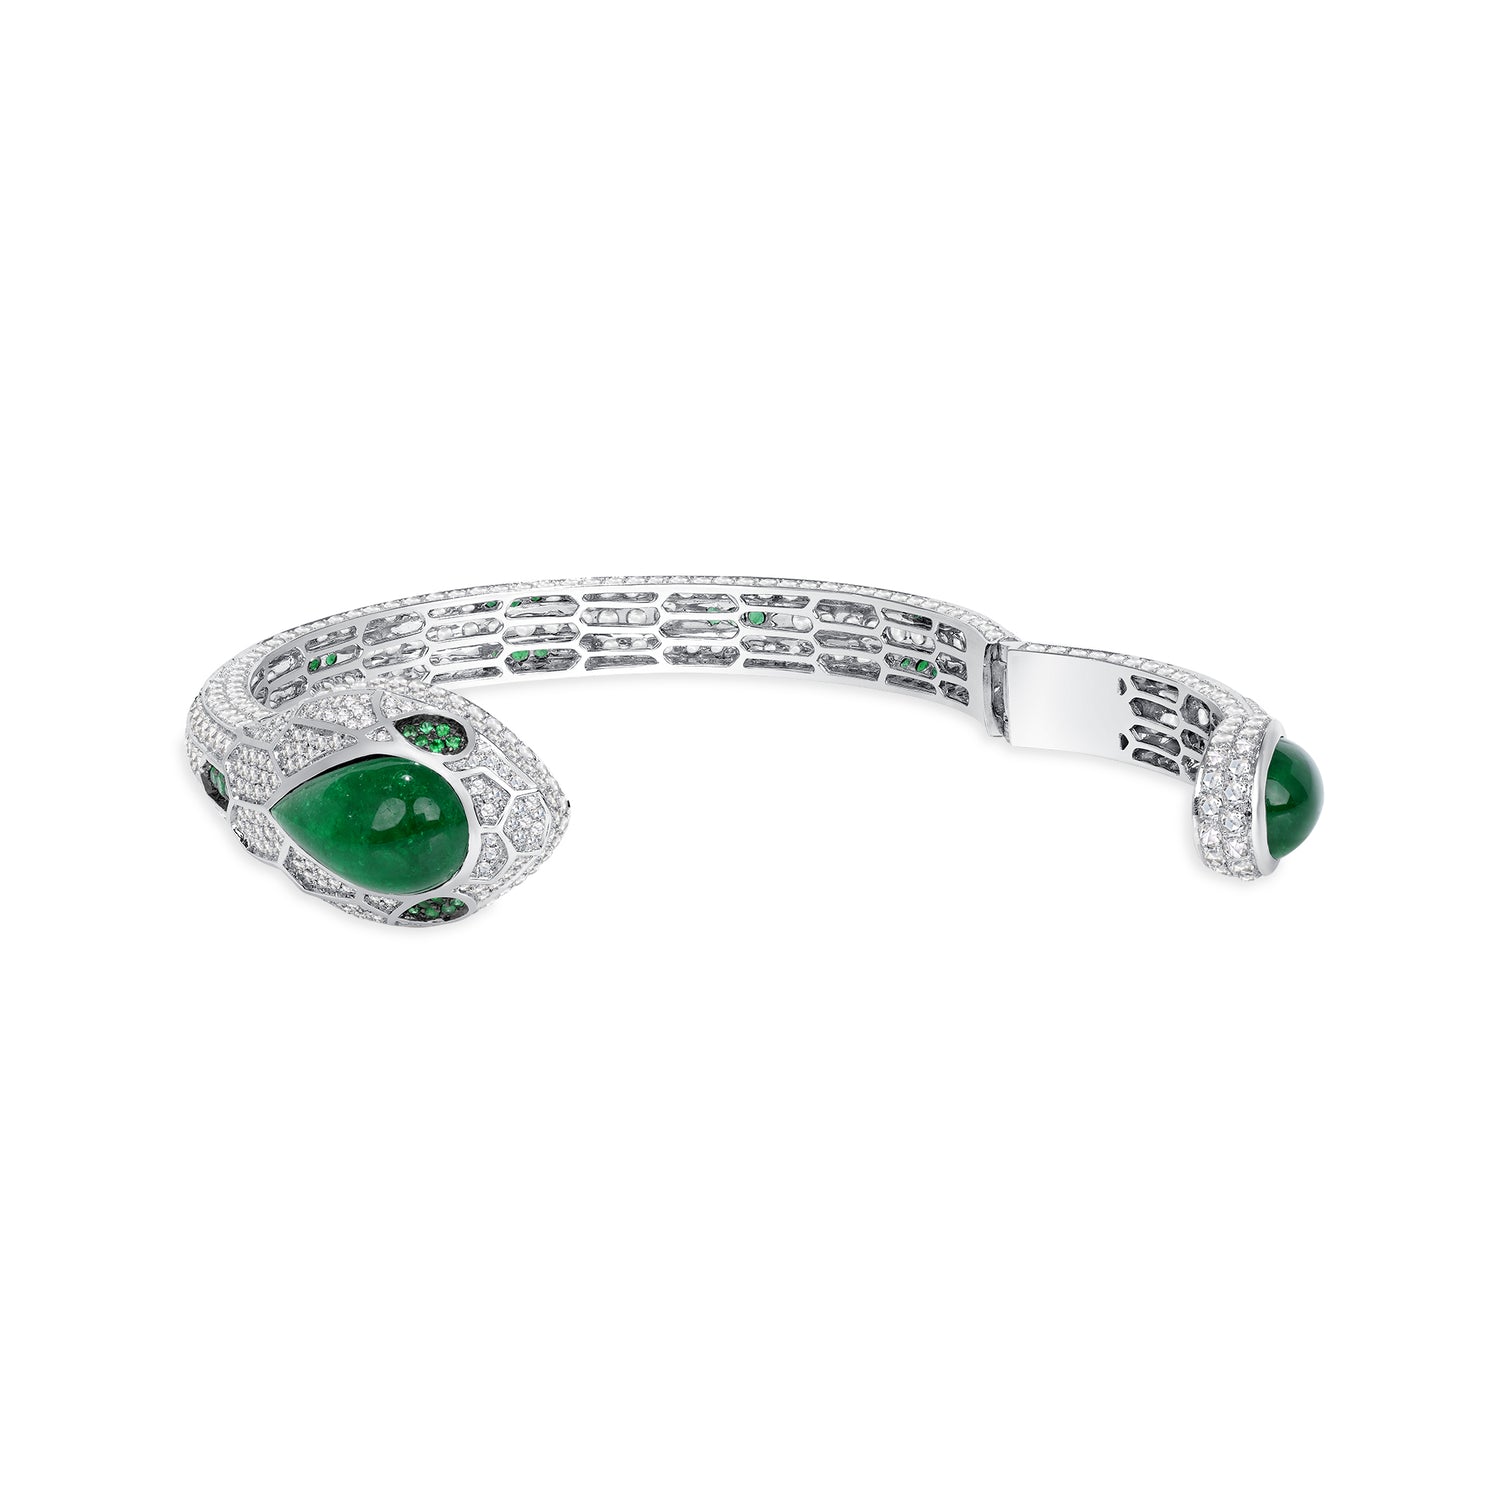 18k White Gold Pear Shape Cabochon Colombian Emerald and Round Brilliant Diamond Melee Bracelet